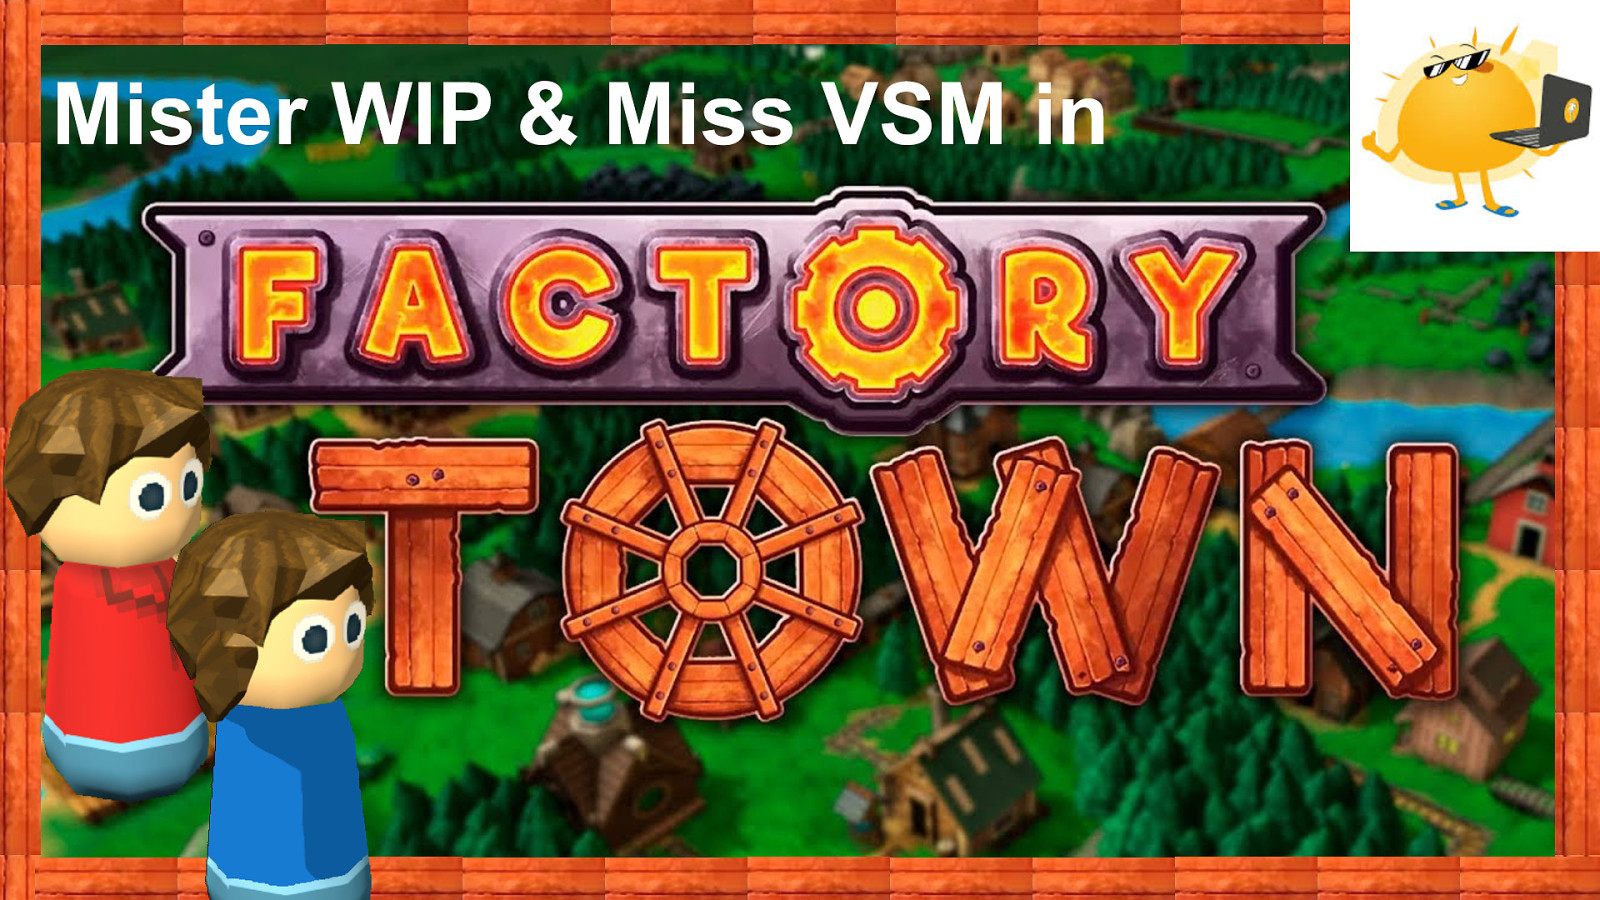 Mister WIP & Miss VSM in Factory Town©️